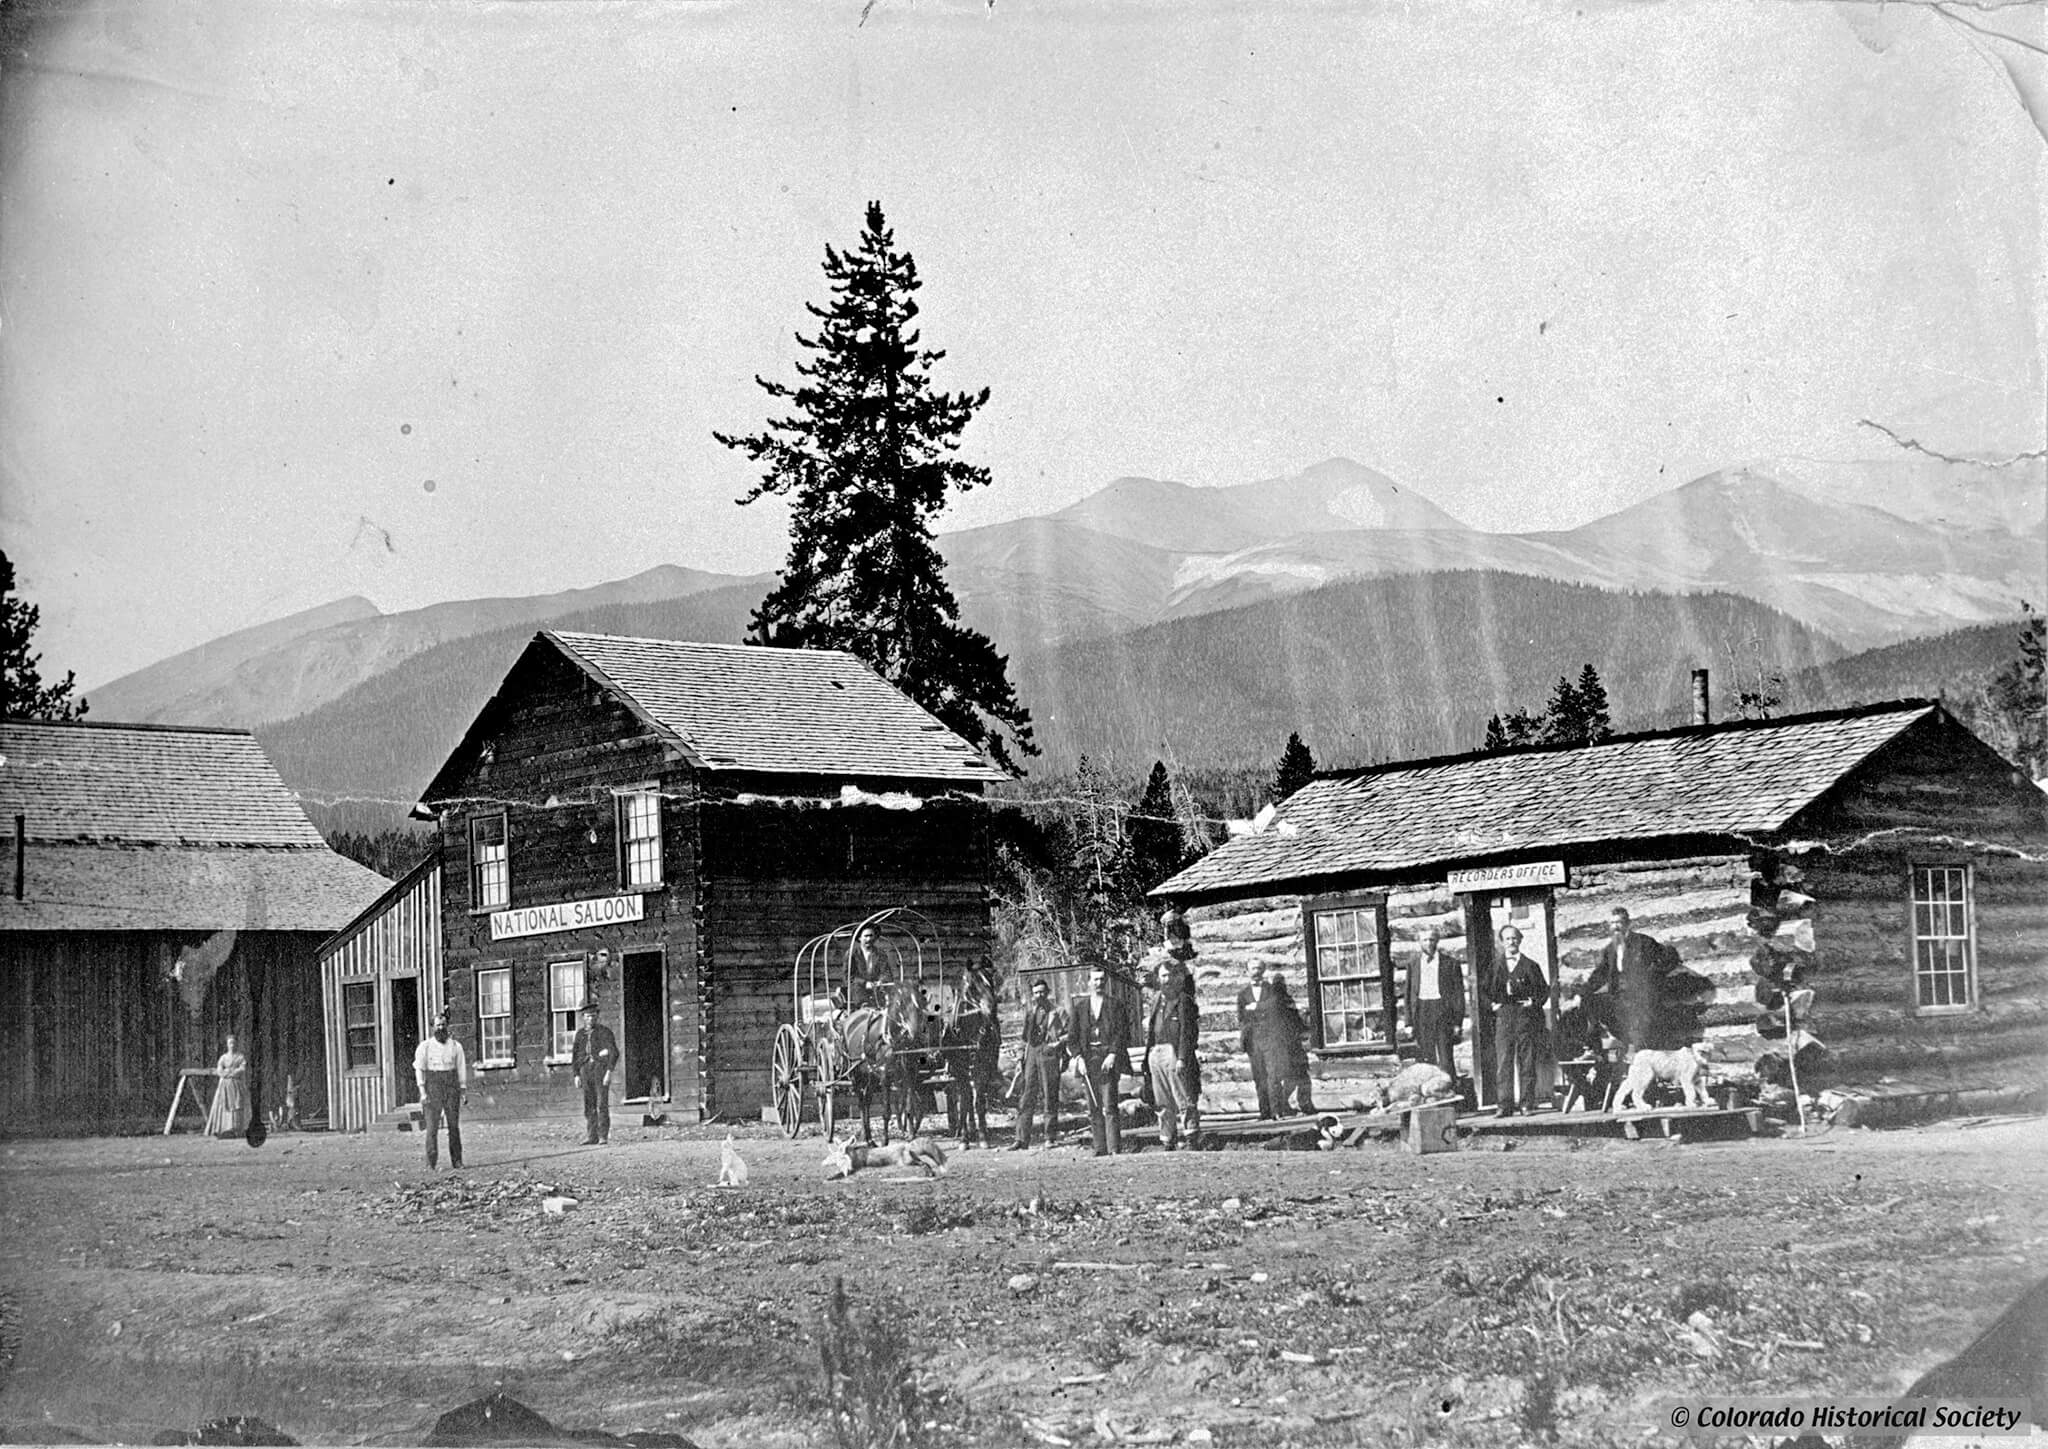 Black and white photo of Breckenridge's Main Street in the 1800's.